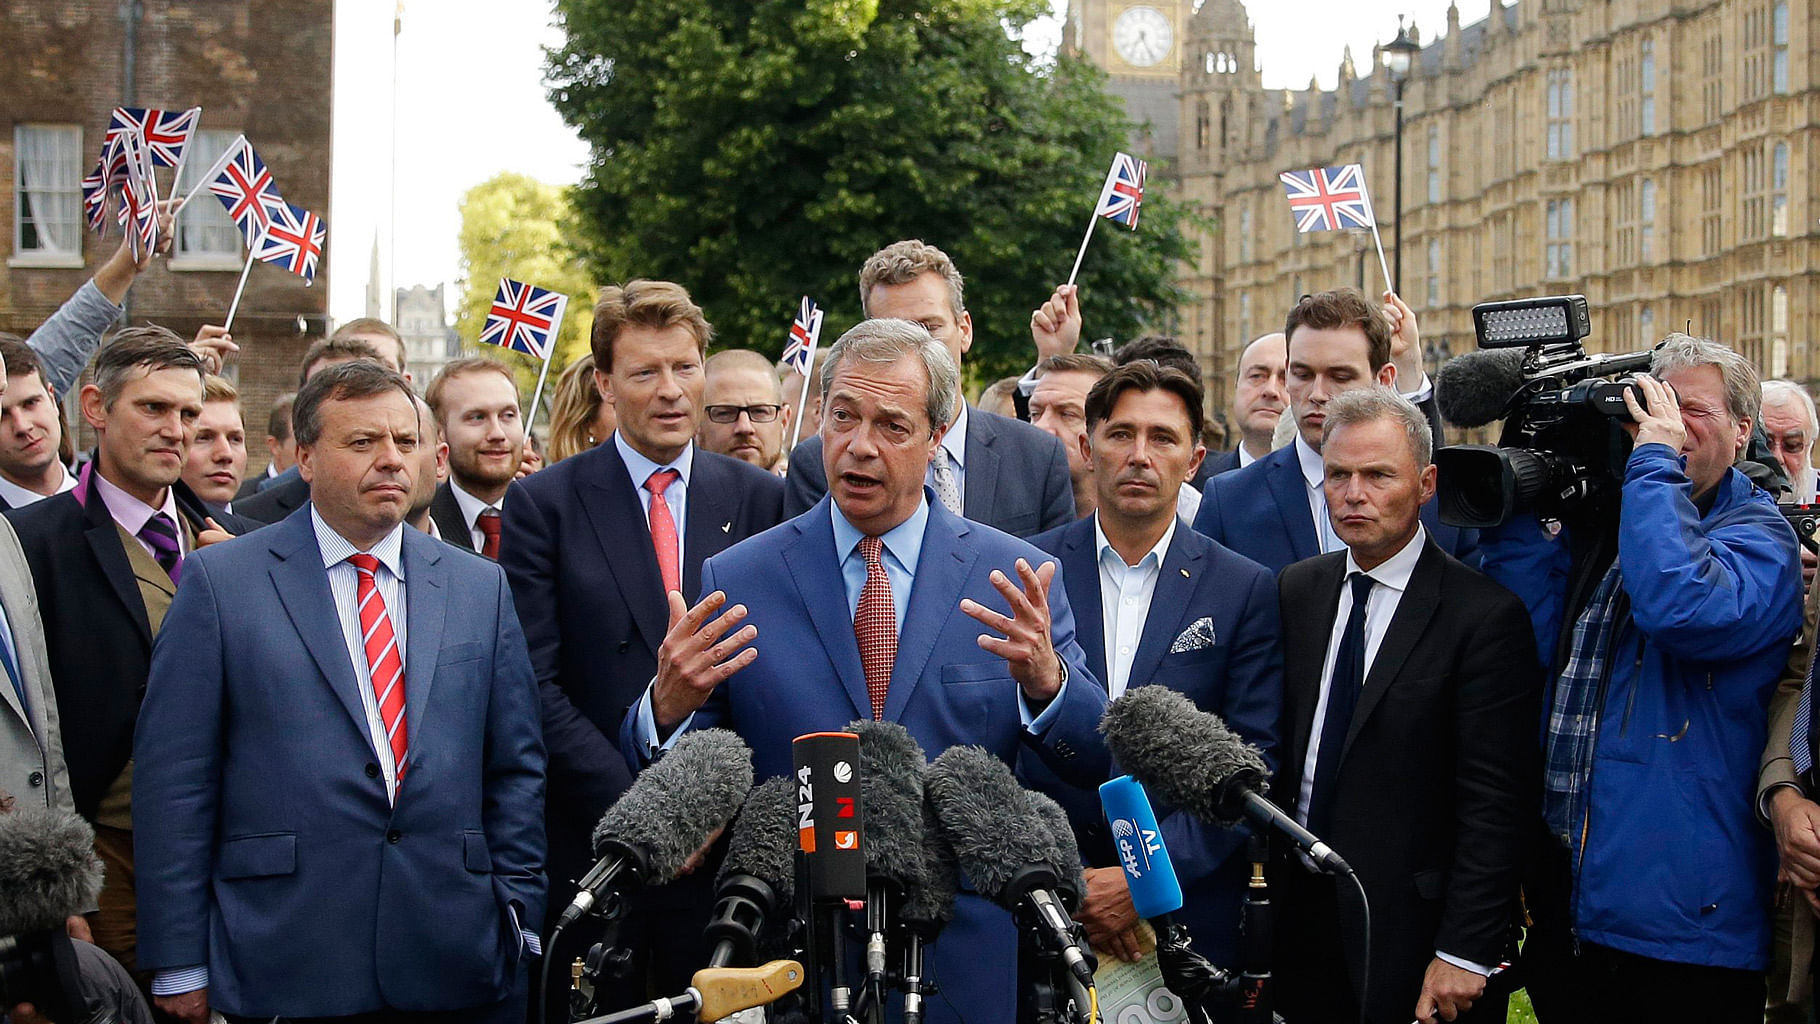 

Leader of the UK Independent Party (UKIP) Nigel Farage talks to the media on Friday as UK decided to leave EU. (Photo: AP)